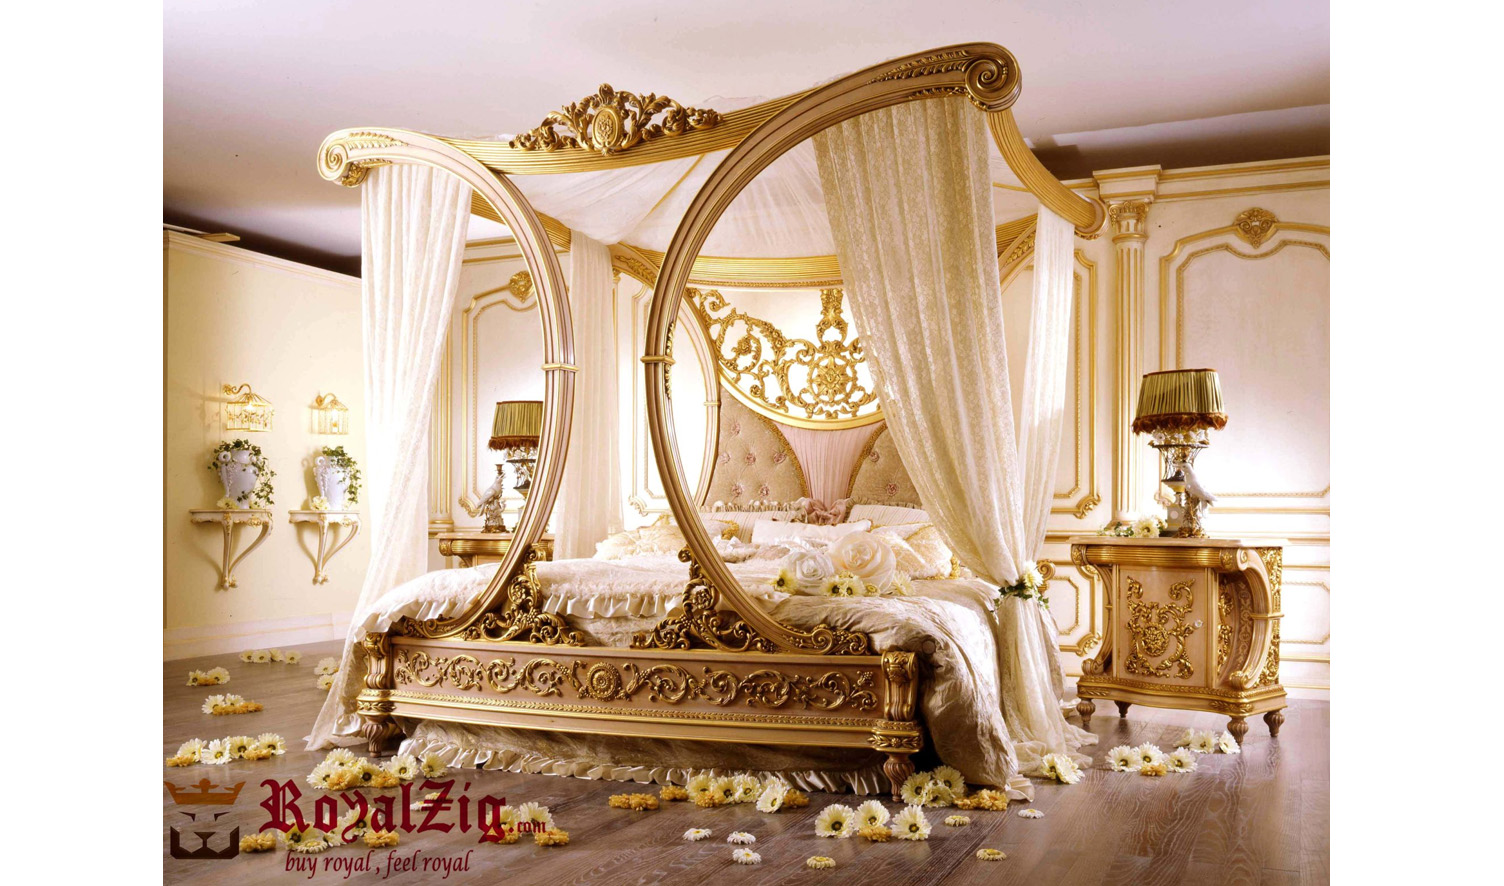 Classic Canopy Bed - Four Poster Bed in Teak Wood Carving - Carved In India - Brand Royalzig Luxury Furniture 